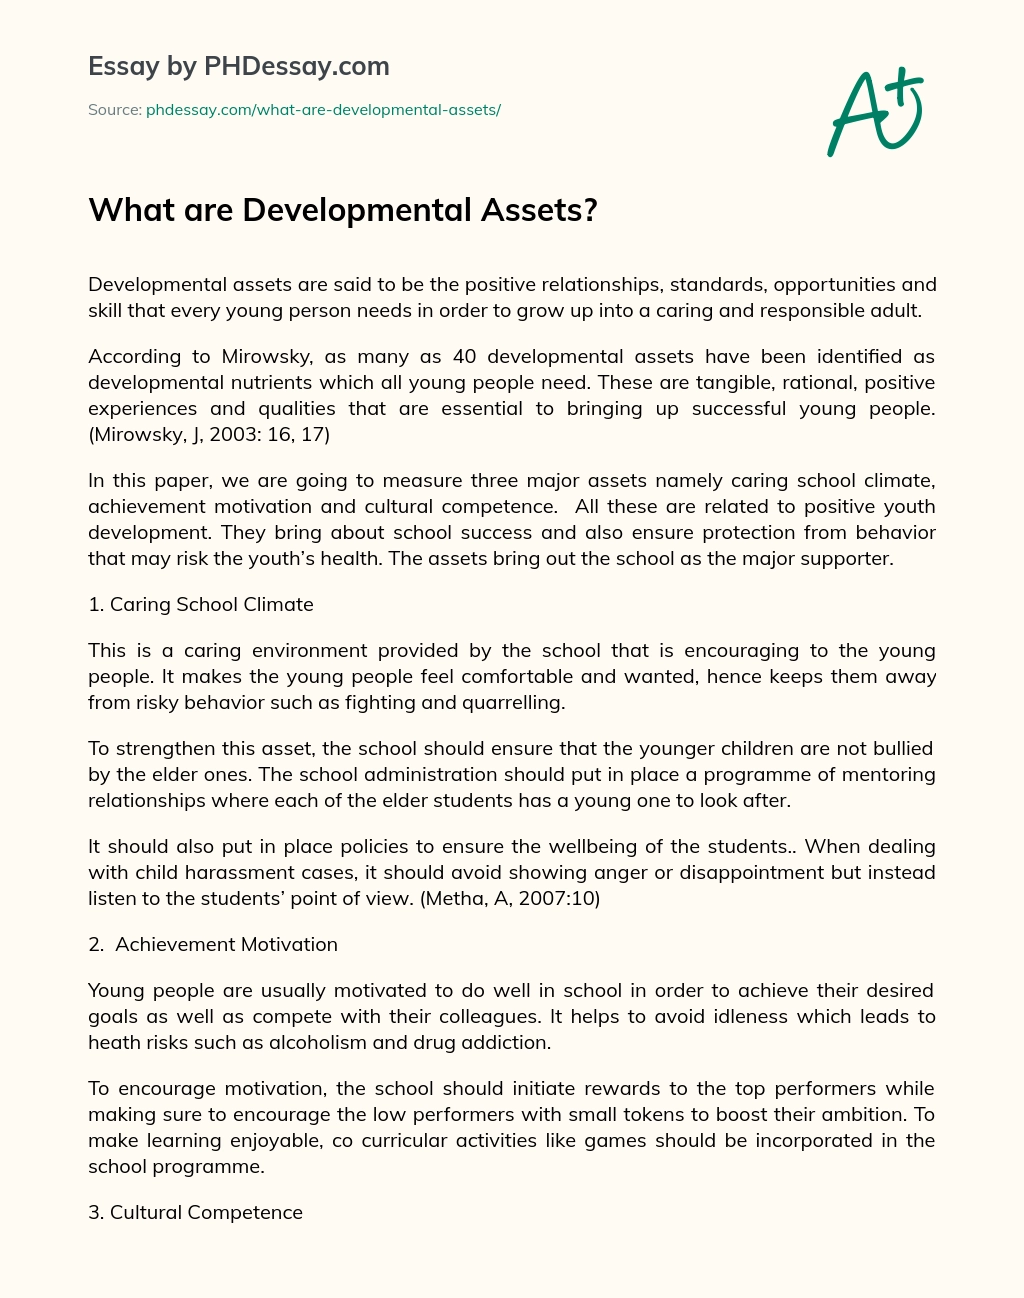 What are Developmental Assets? essay